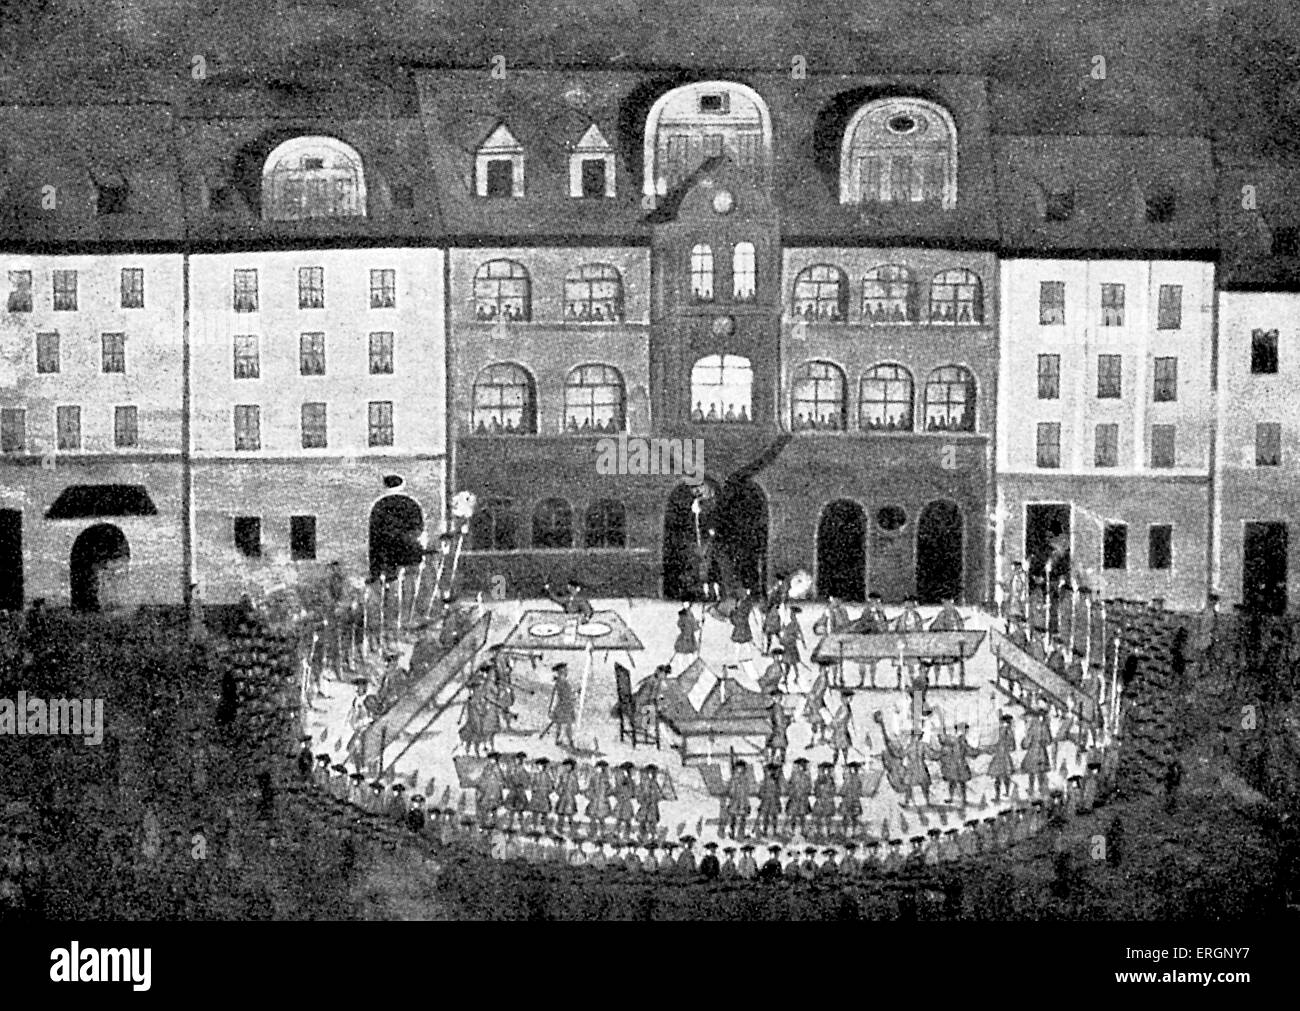 The old student music college in Jena perform in front of a home on Johannistrasse around 1744. Stock Photo